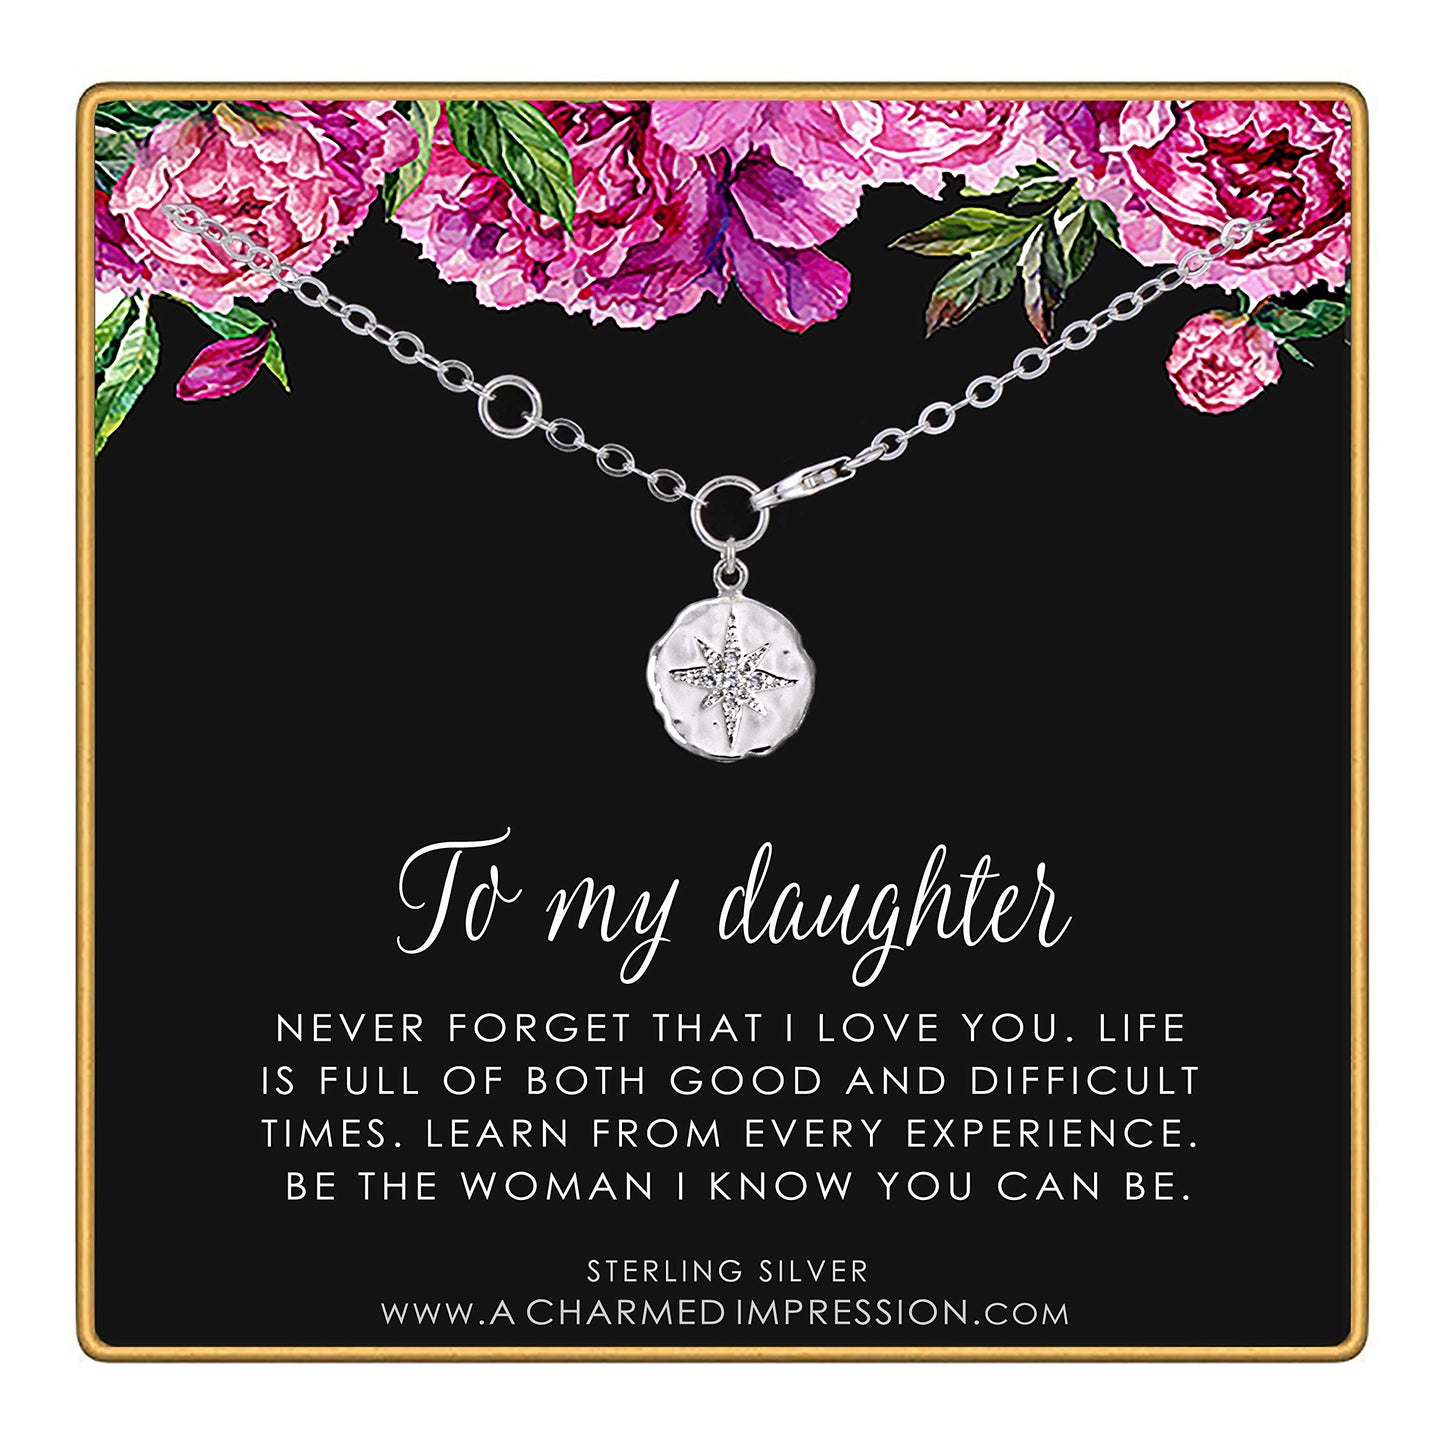 Gift for Daughter •  Silver CZ Diamond Starburst Bracelet • Daughter Gifts from Mom Dad • Teen Girls Adult Daughter • Encouragement Gifts for Women • Motivational Inspirational Jewelry